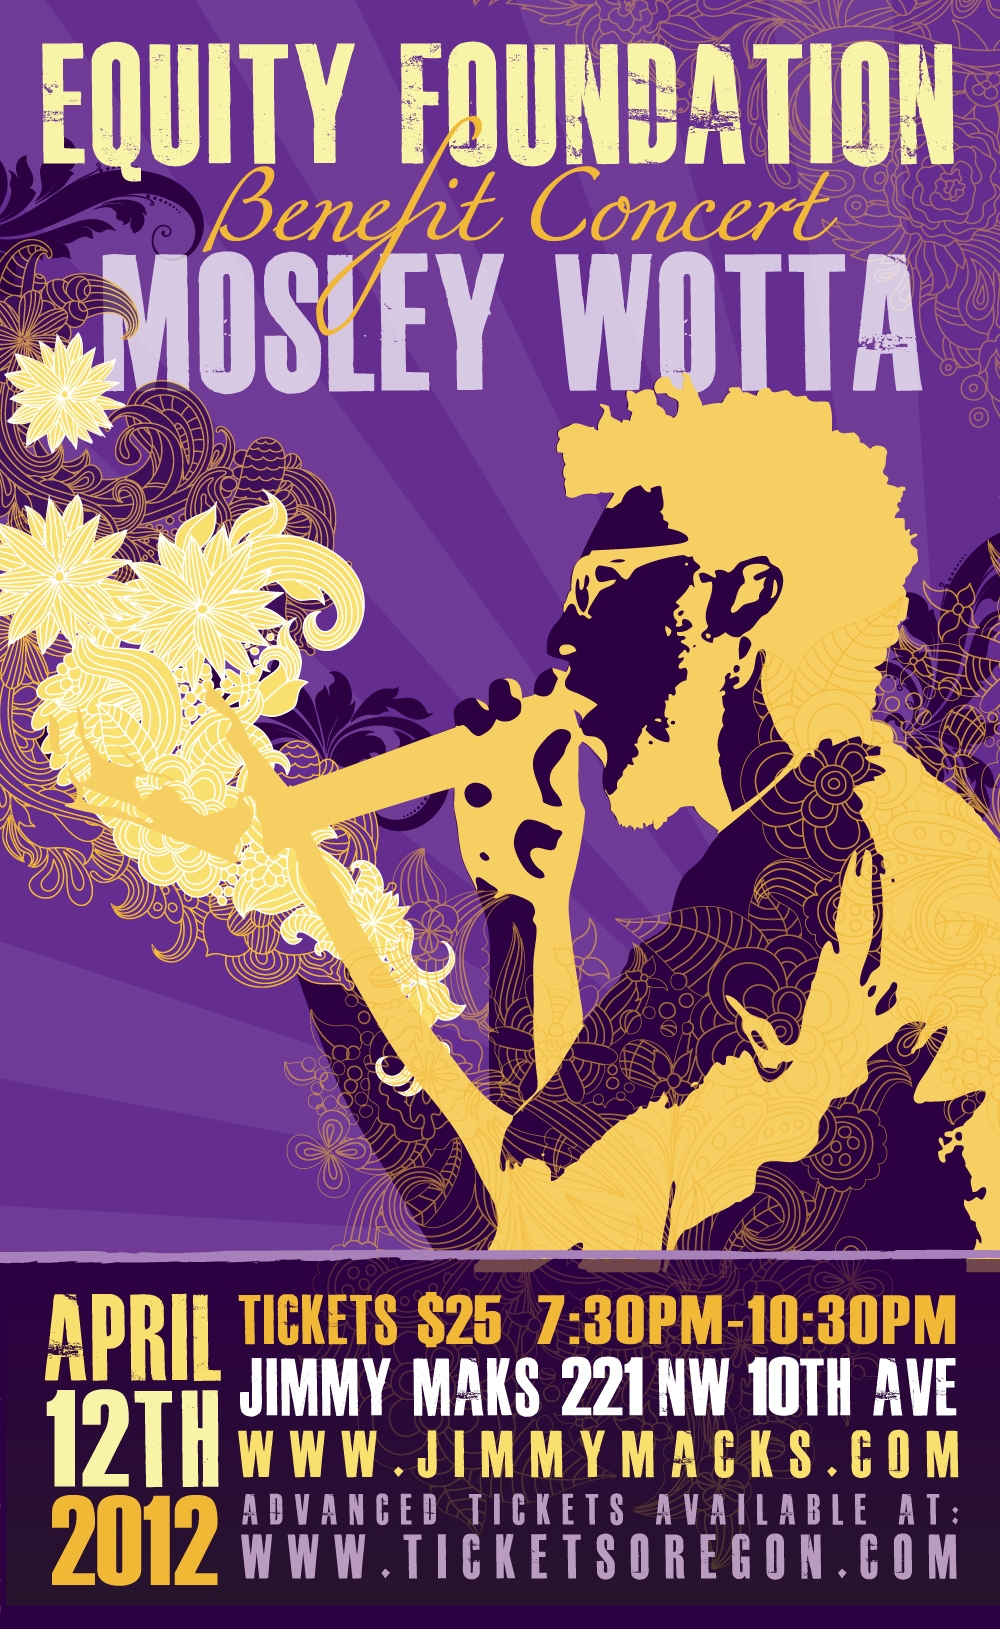 Mosley Wotta does benefit concert for Equity on April 12